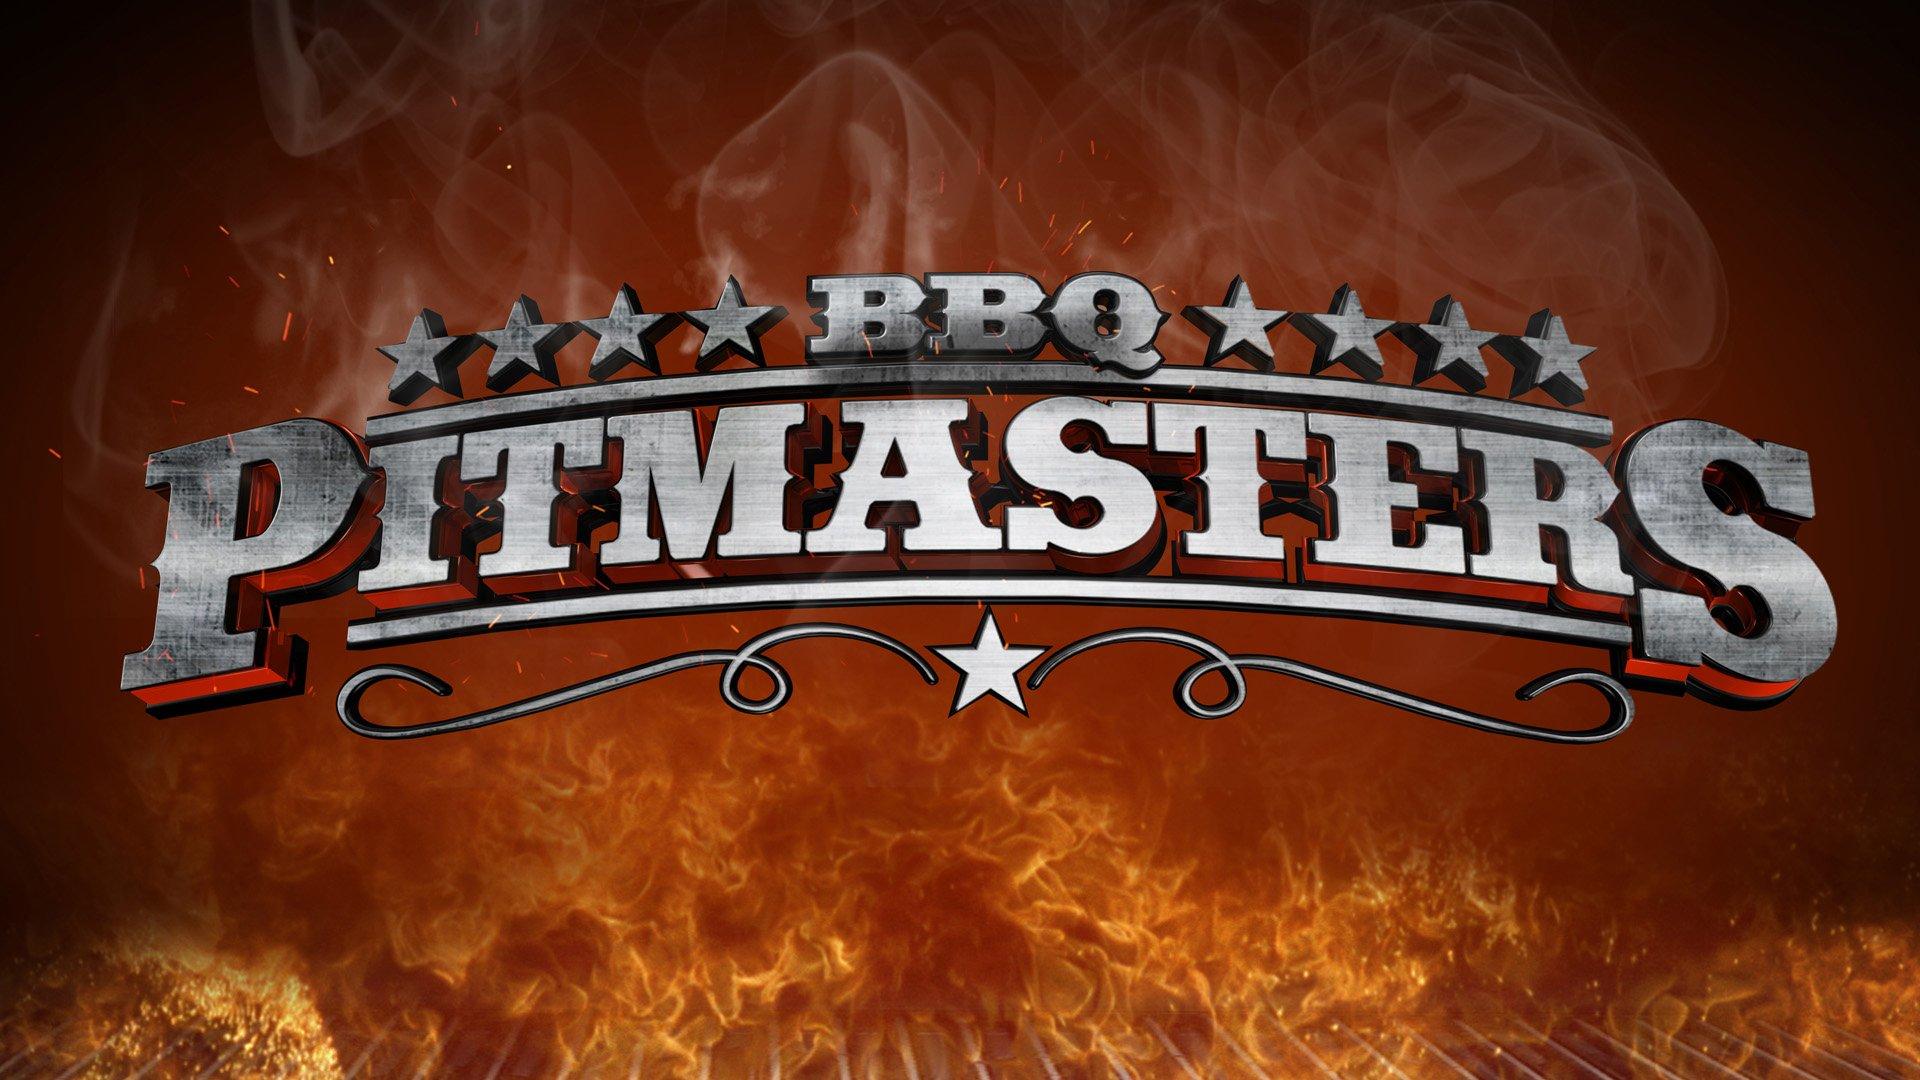 Watch BBQ Pitmasters Streaming Online on Philo (Free Trial)